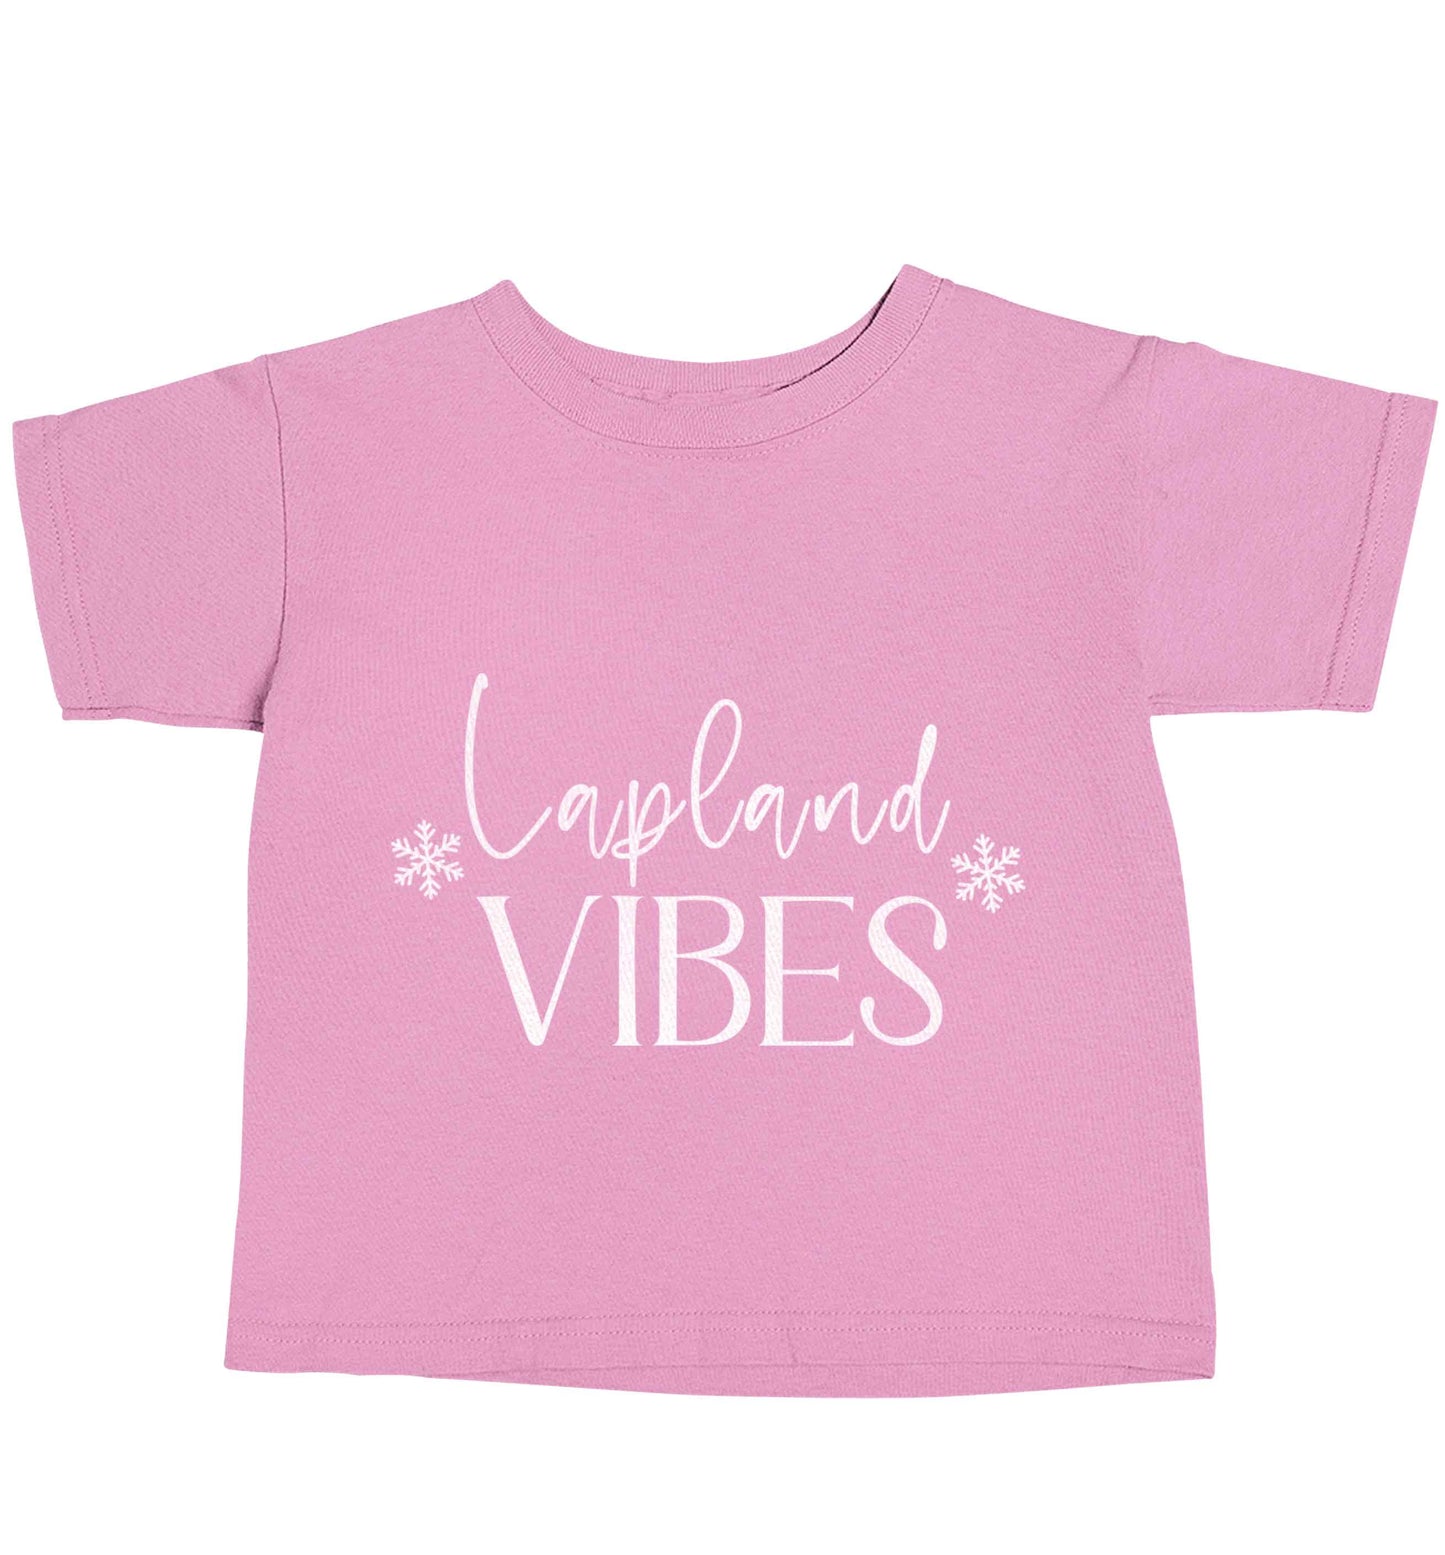 Lapland vibes light pink baby toddler Tshirt 2 Years